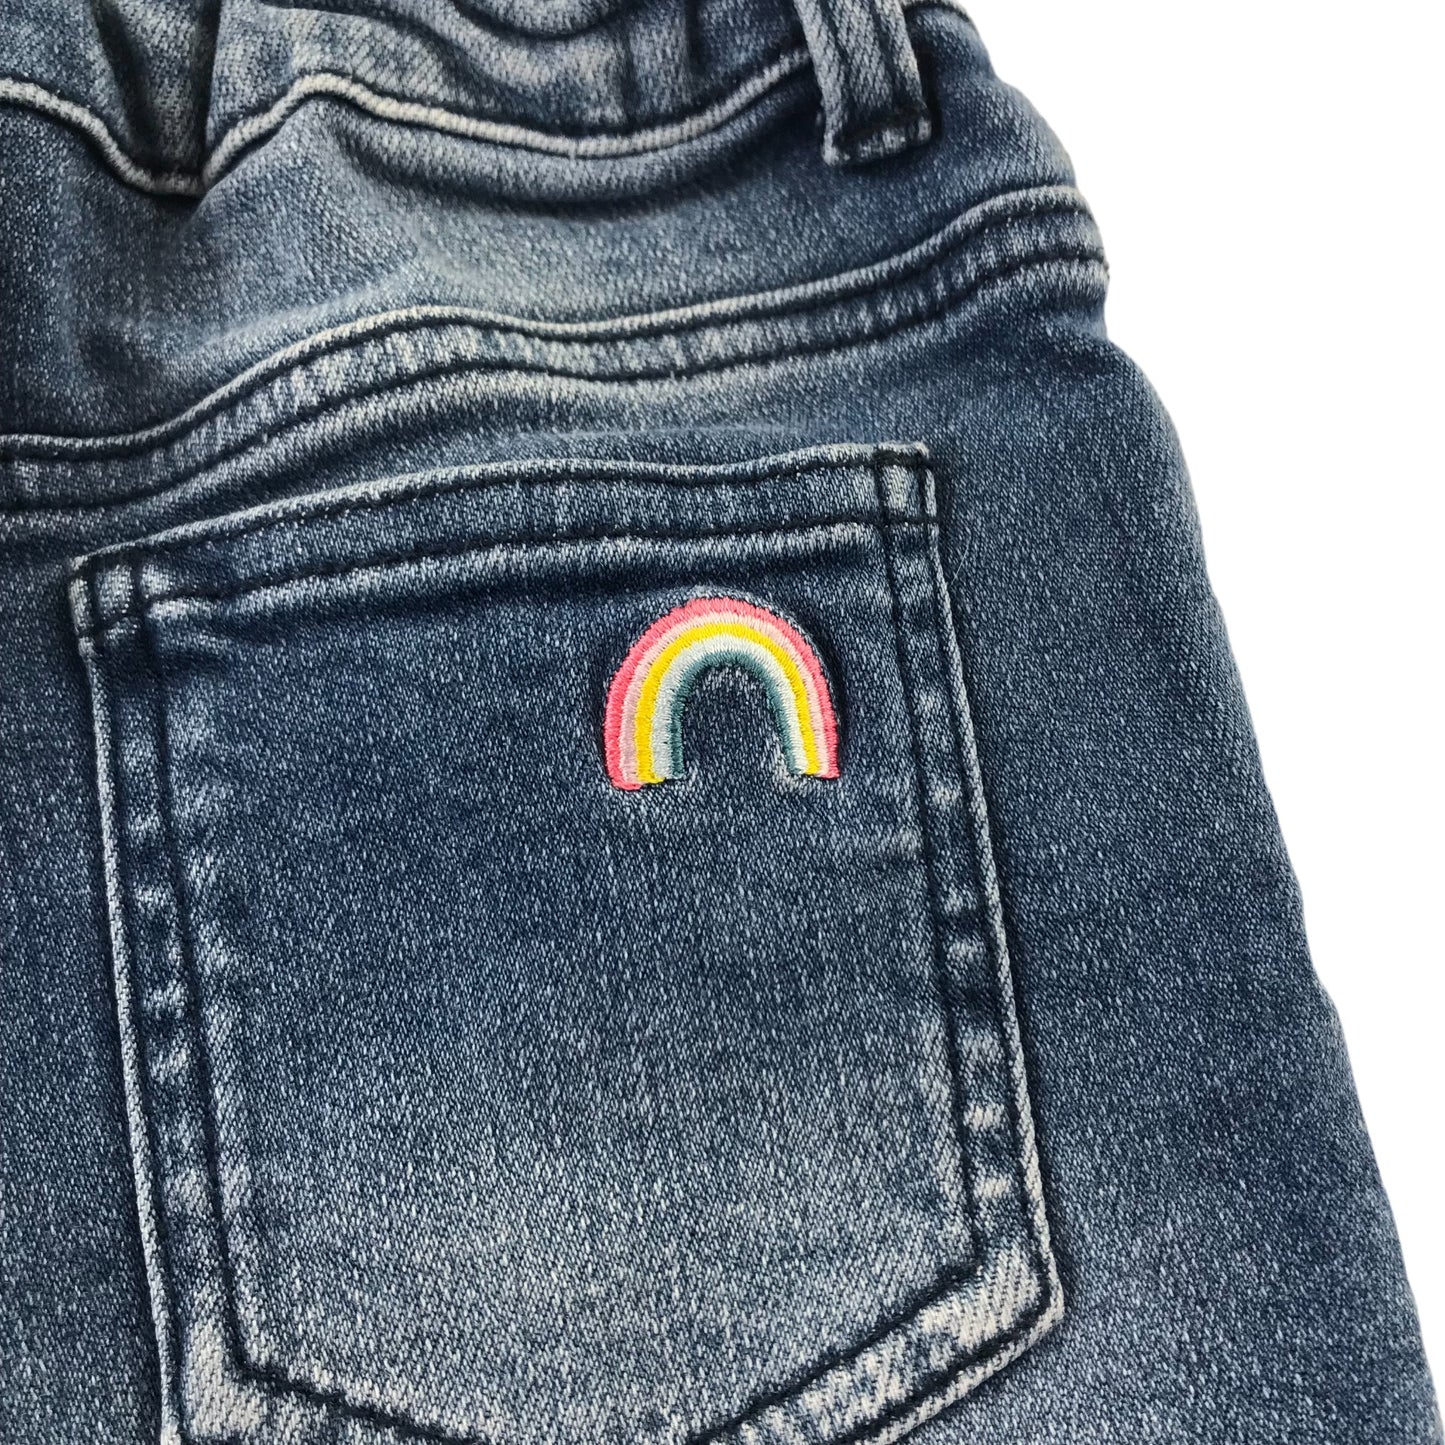 Joules Shorts Age 6 Blue Denim with Rainbow and Rabbit Embroidery